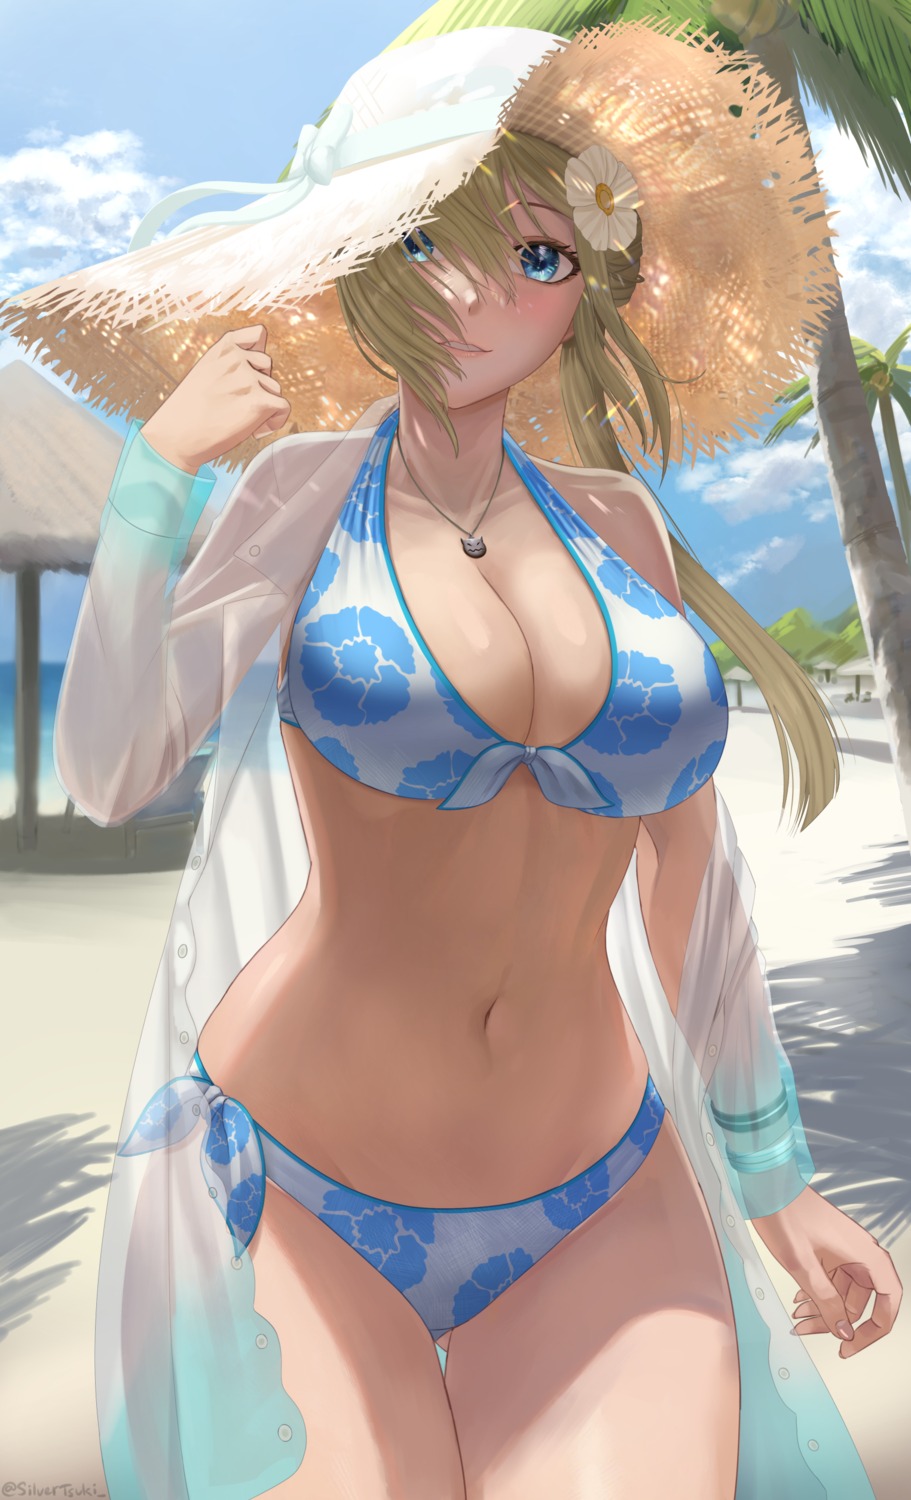 bikini open_shirt see_through silvertsuki1 swimsuits tales_of tales_of_the_abyss tear_grants